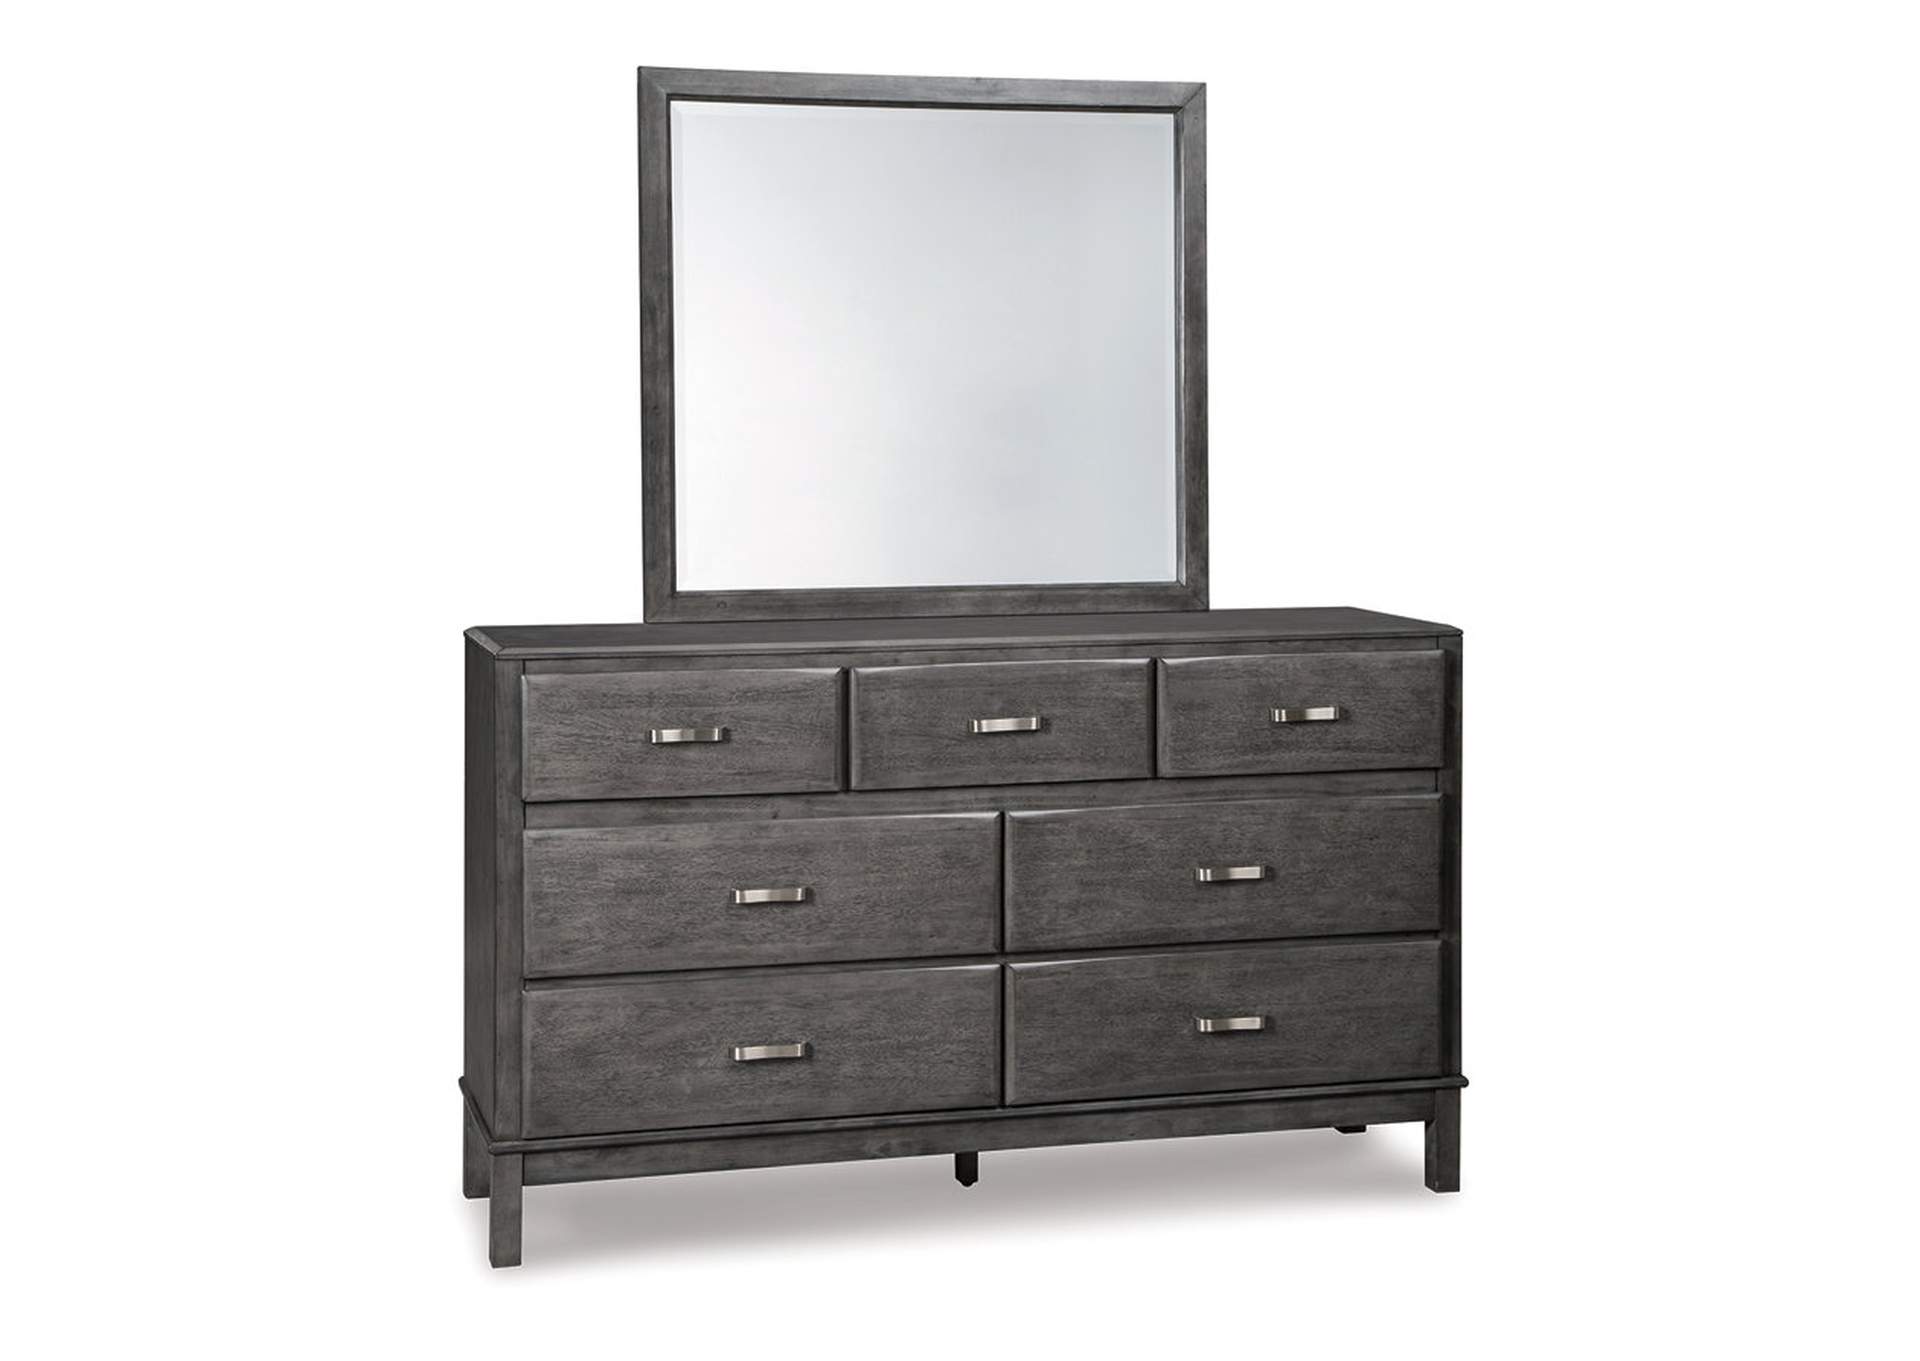 Caitbrook Full Storage Bed with 7 Storage Drawers with Mirrored Dresser, Chest and Nightstand,Signature Design By Ashley